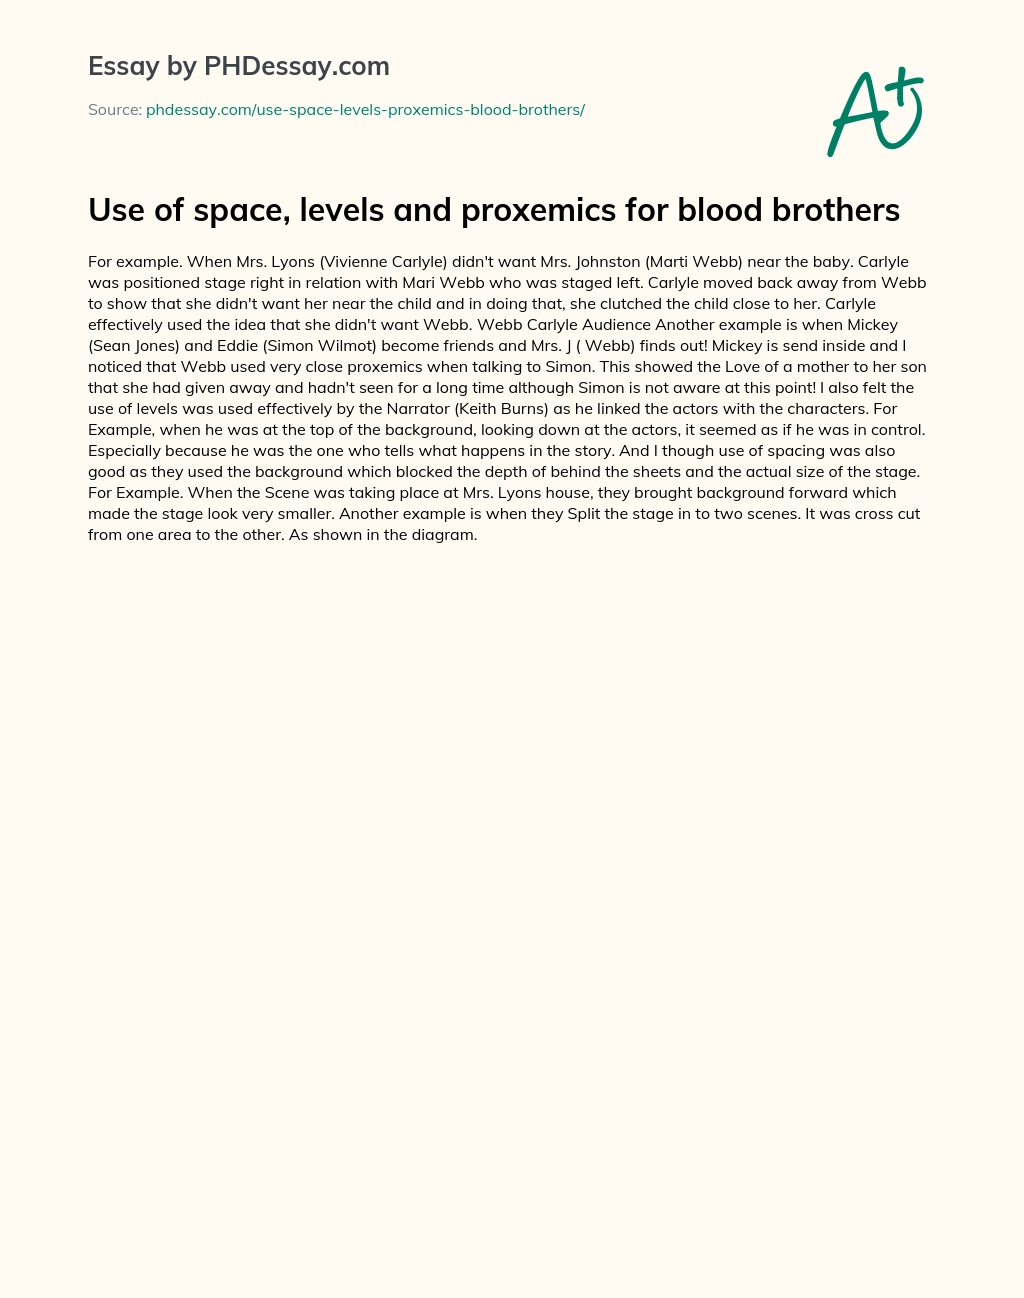 Use of space, levels and proxemics for blood brothers essay